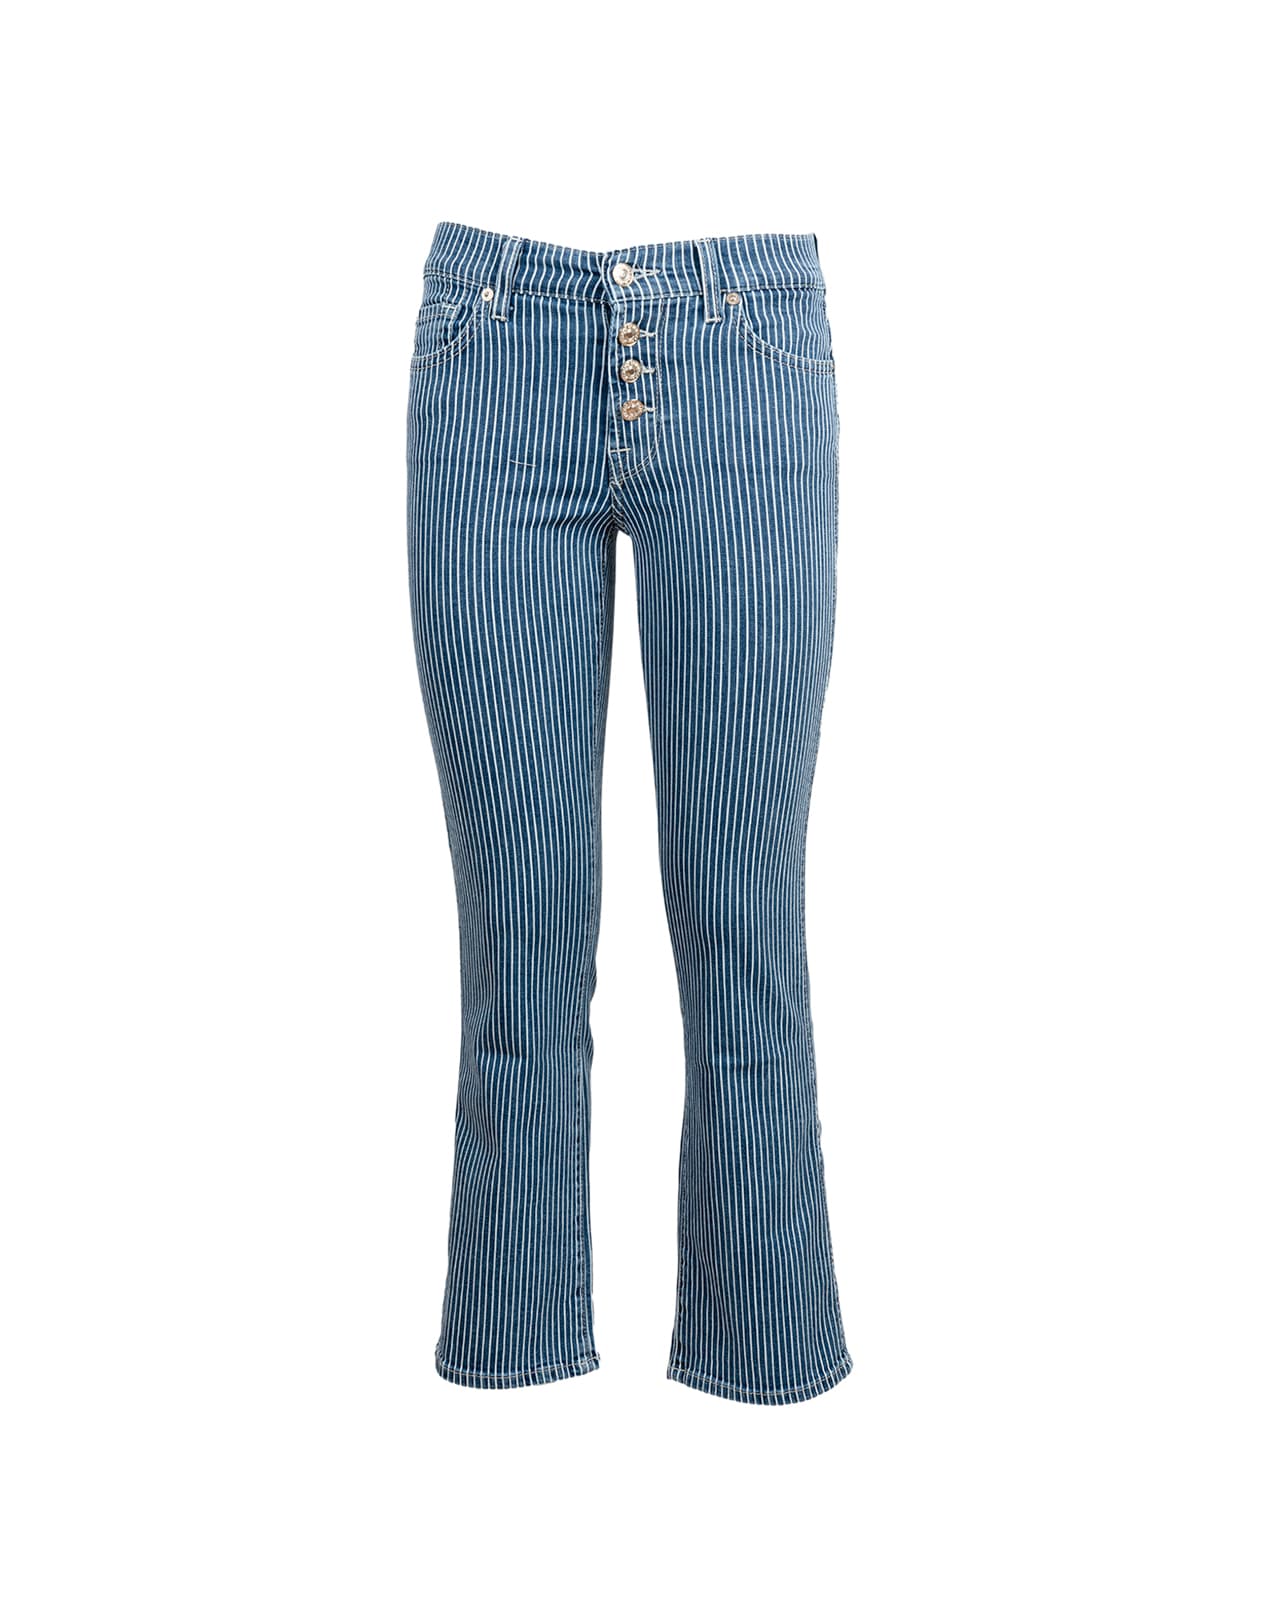 7 For All Mankind Seven For All Mankind Ankle Boot jeans in striped denim